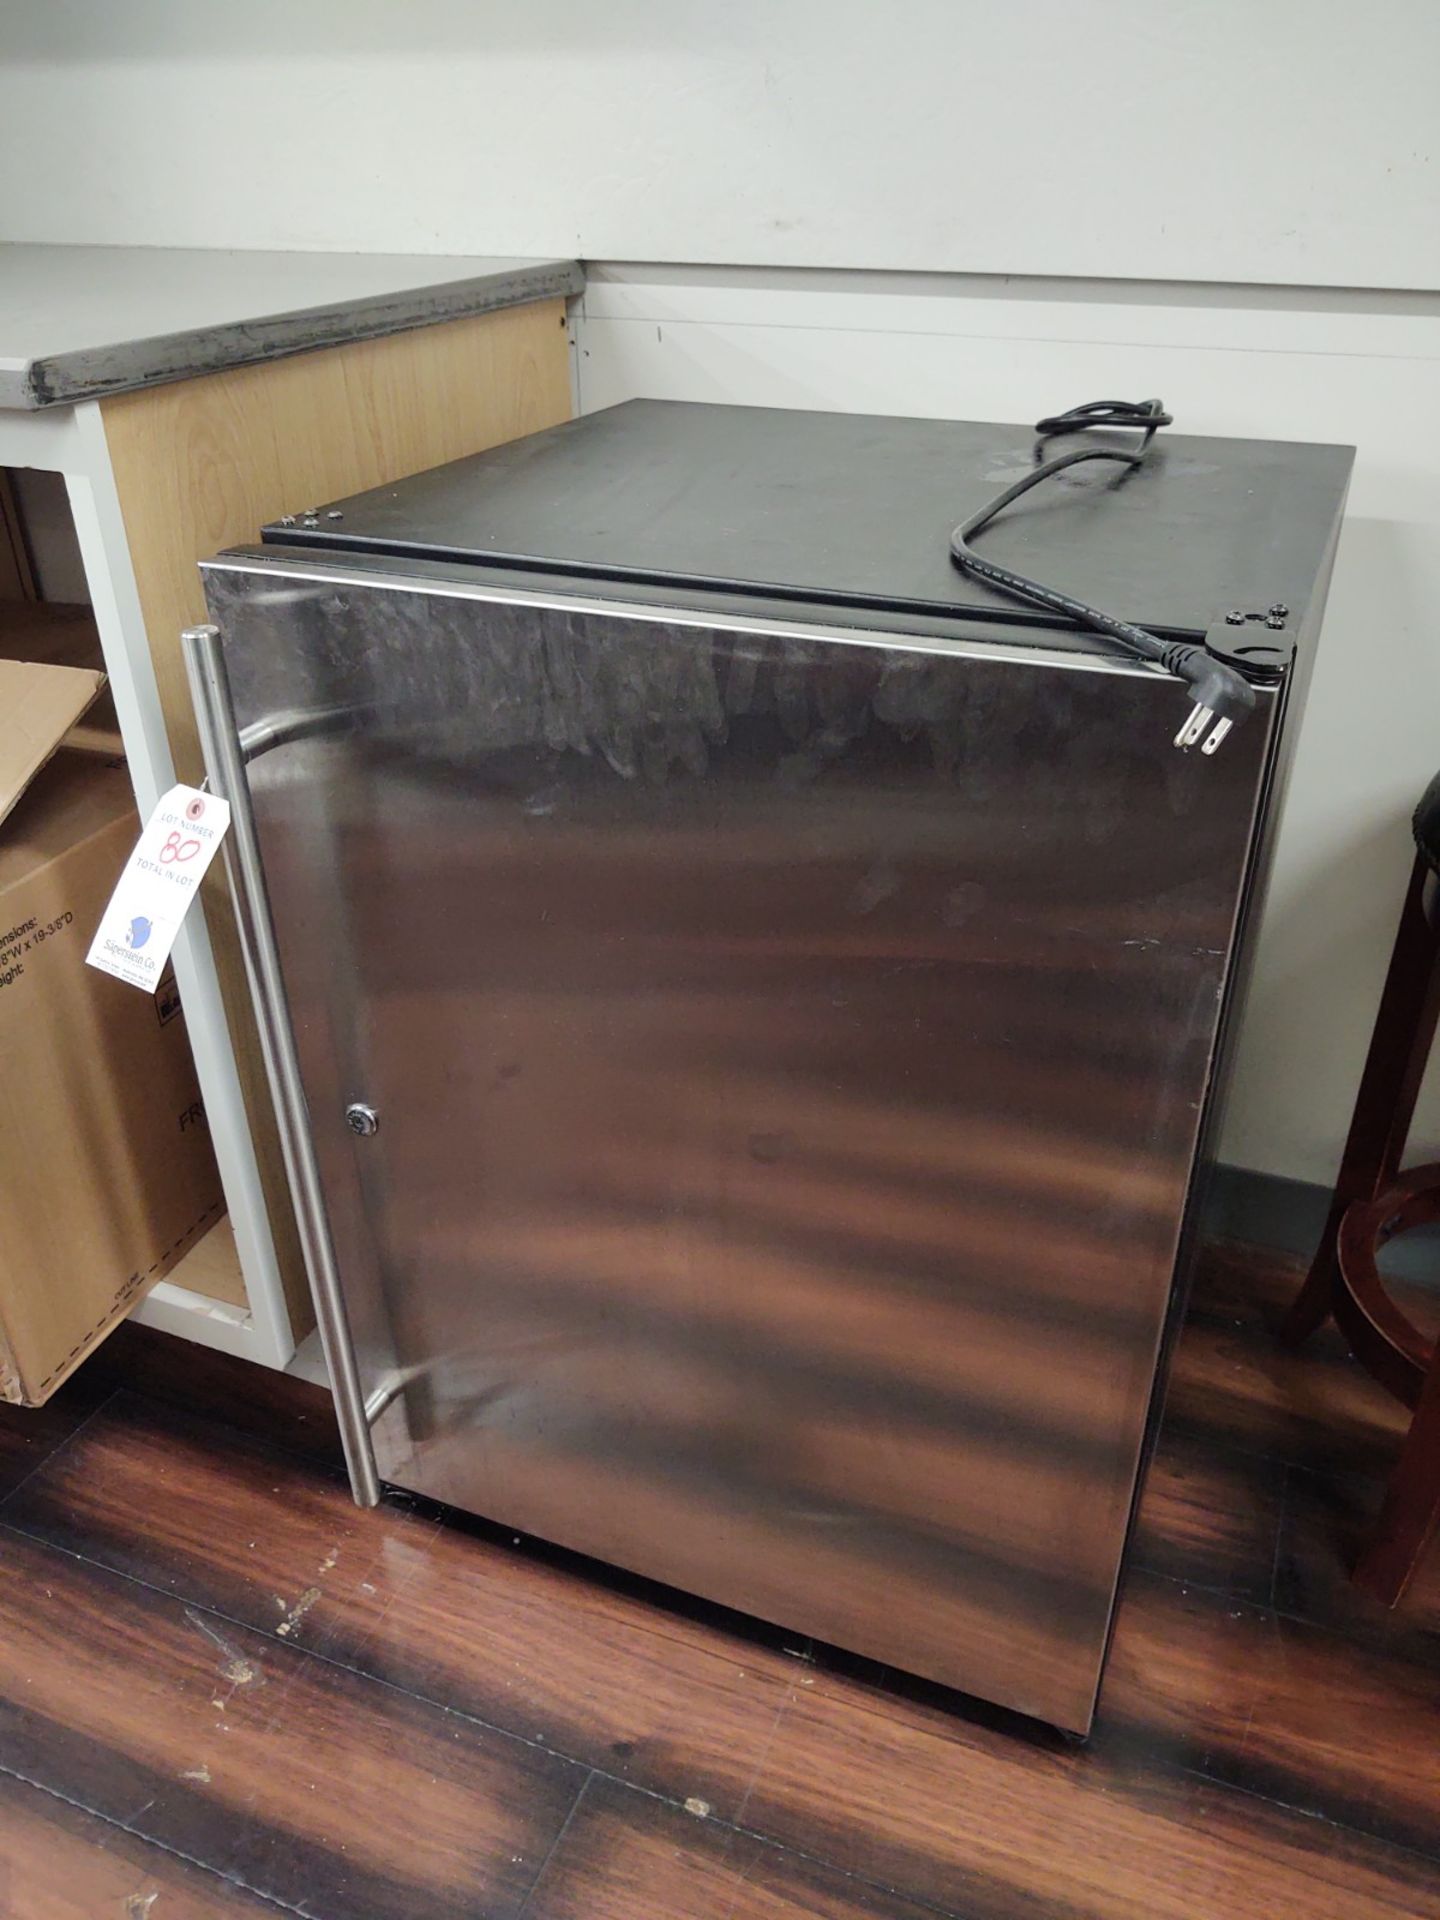 Uline Undercounter 24" Stainless Steel Front Refrigerator (USED)